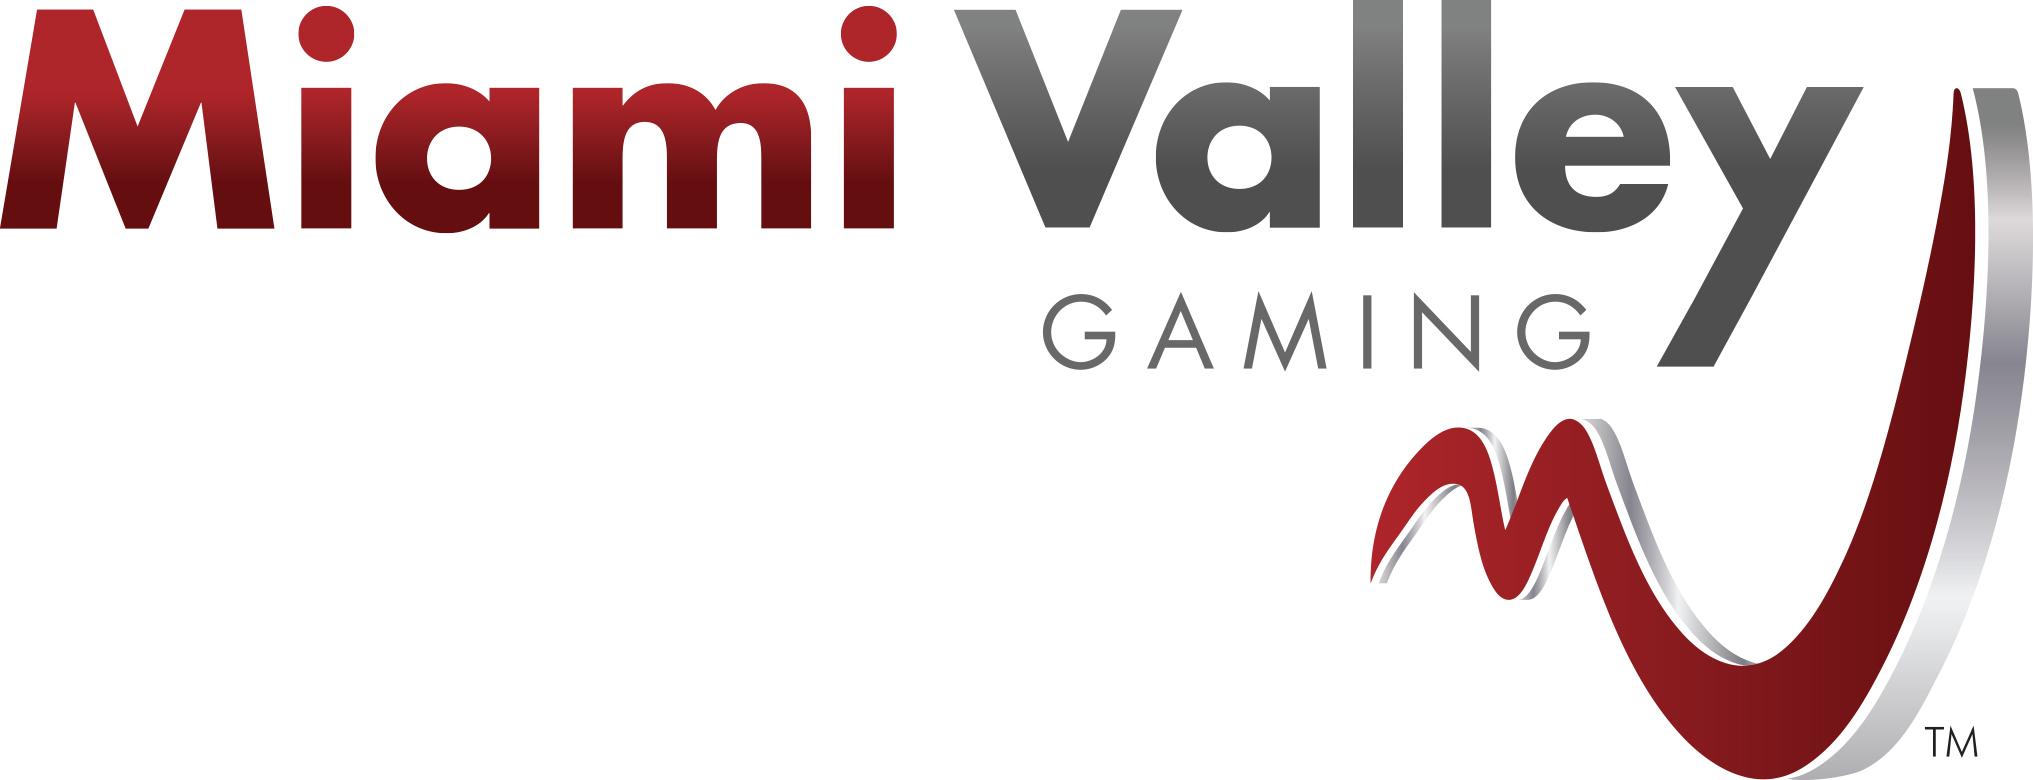 Miami Valley Gaming in two colors